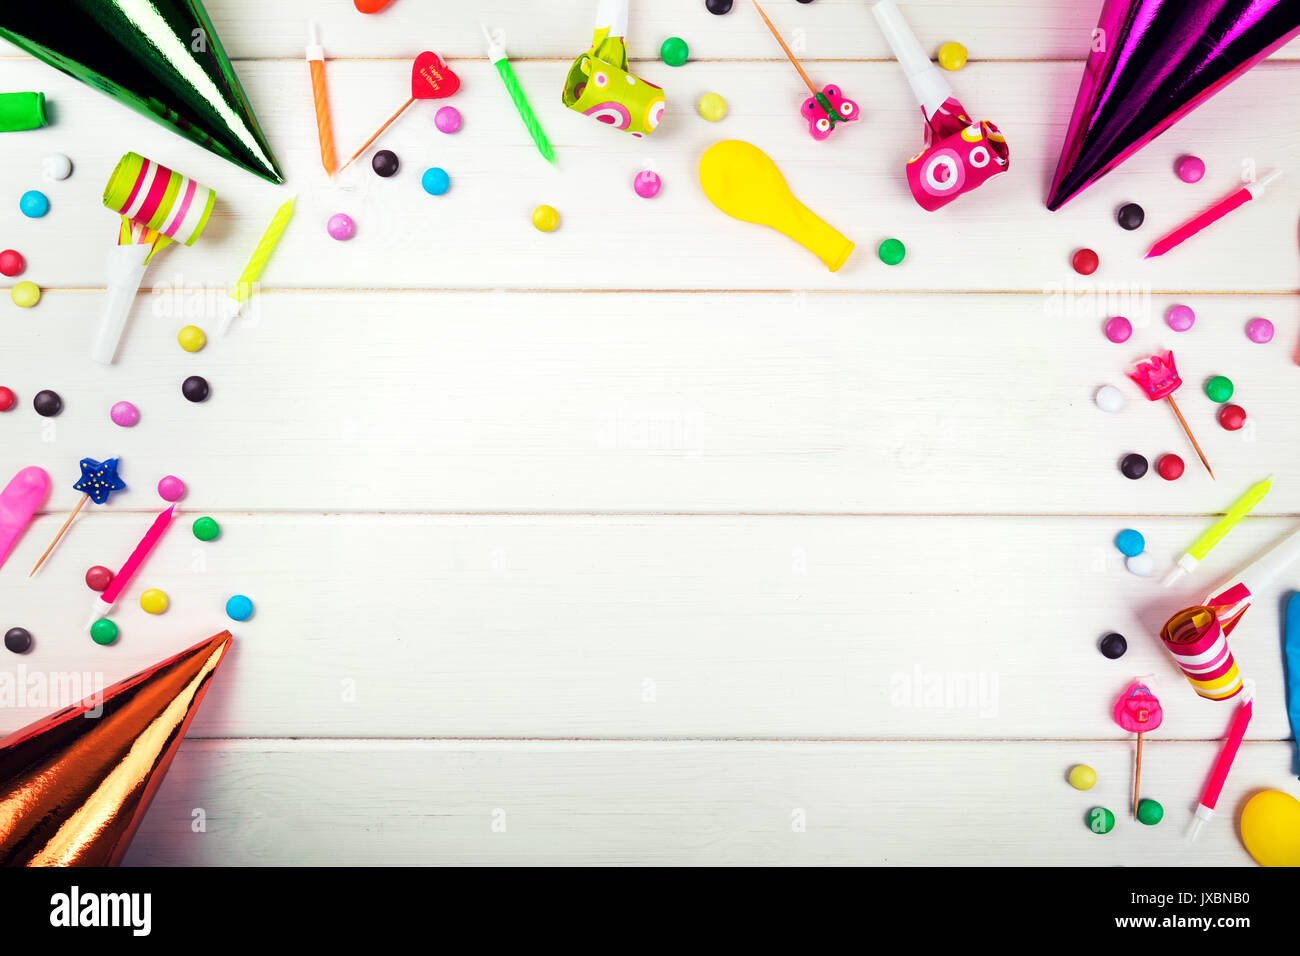 birthday party items and decorations on white wood background. top view Stock Photo